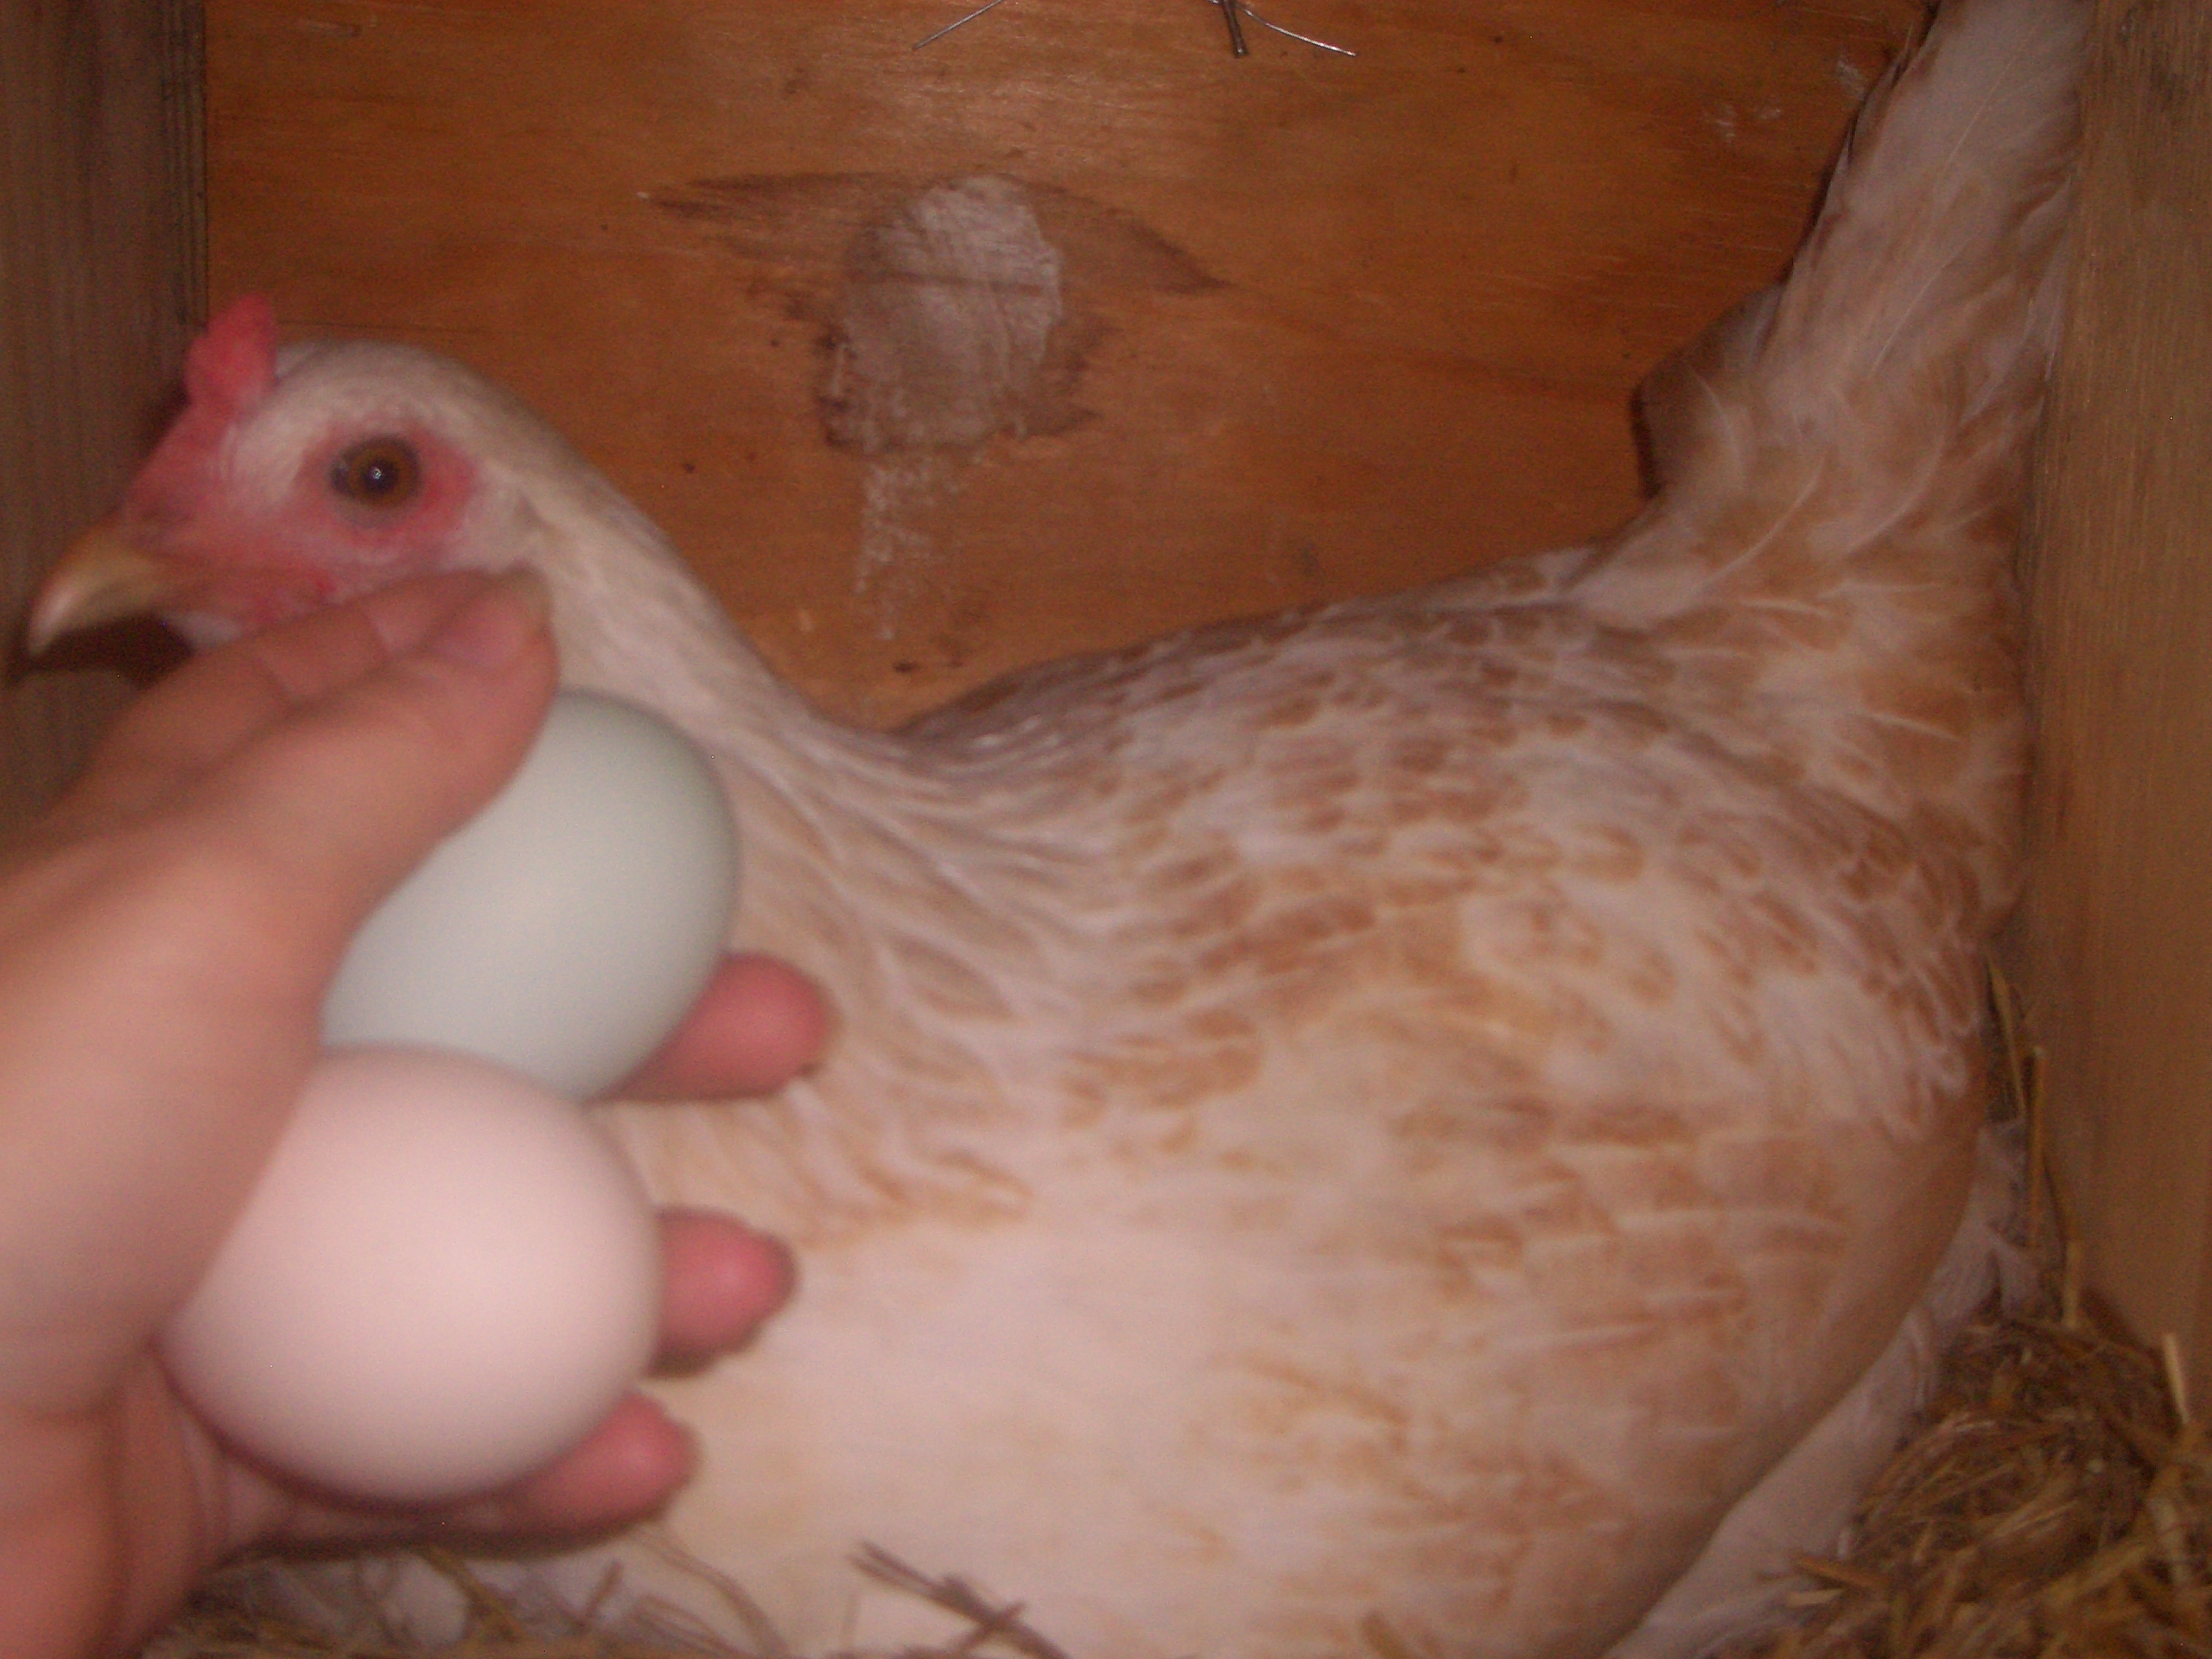 I wonder which egg is her? 
Pink or blue?